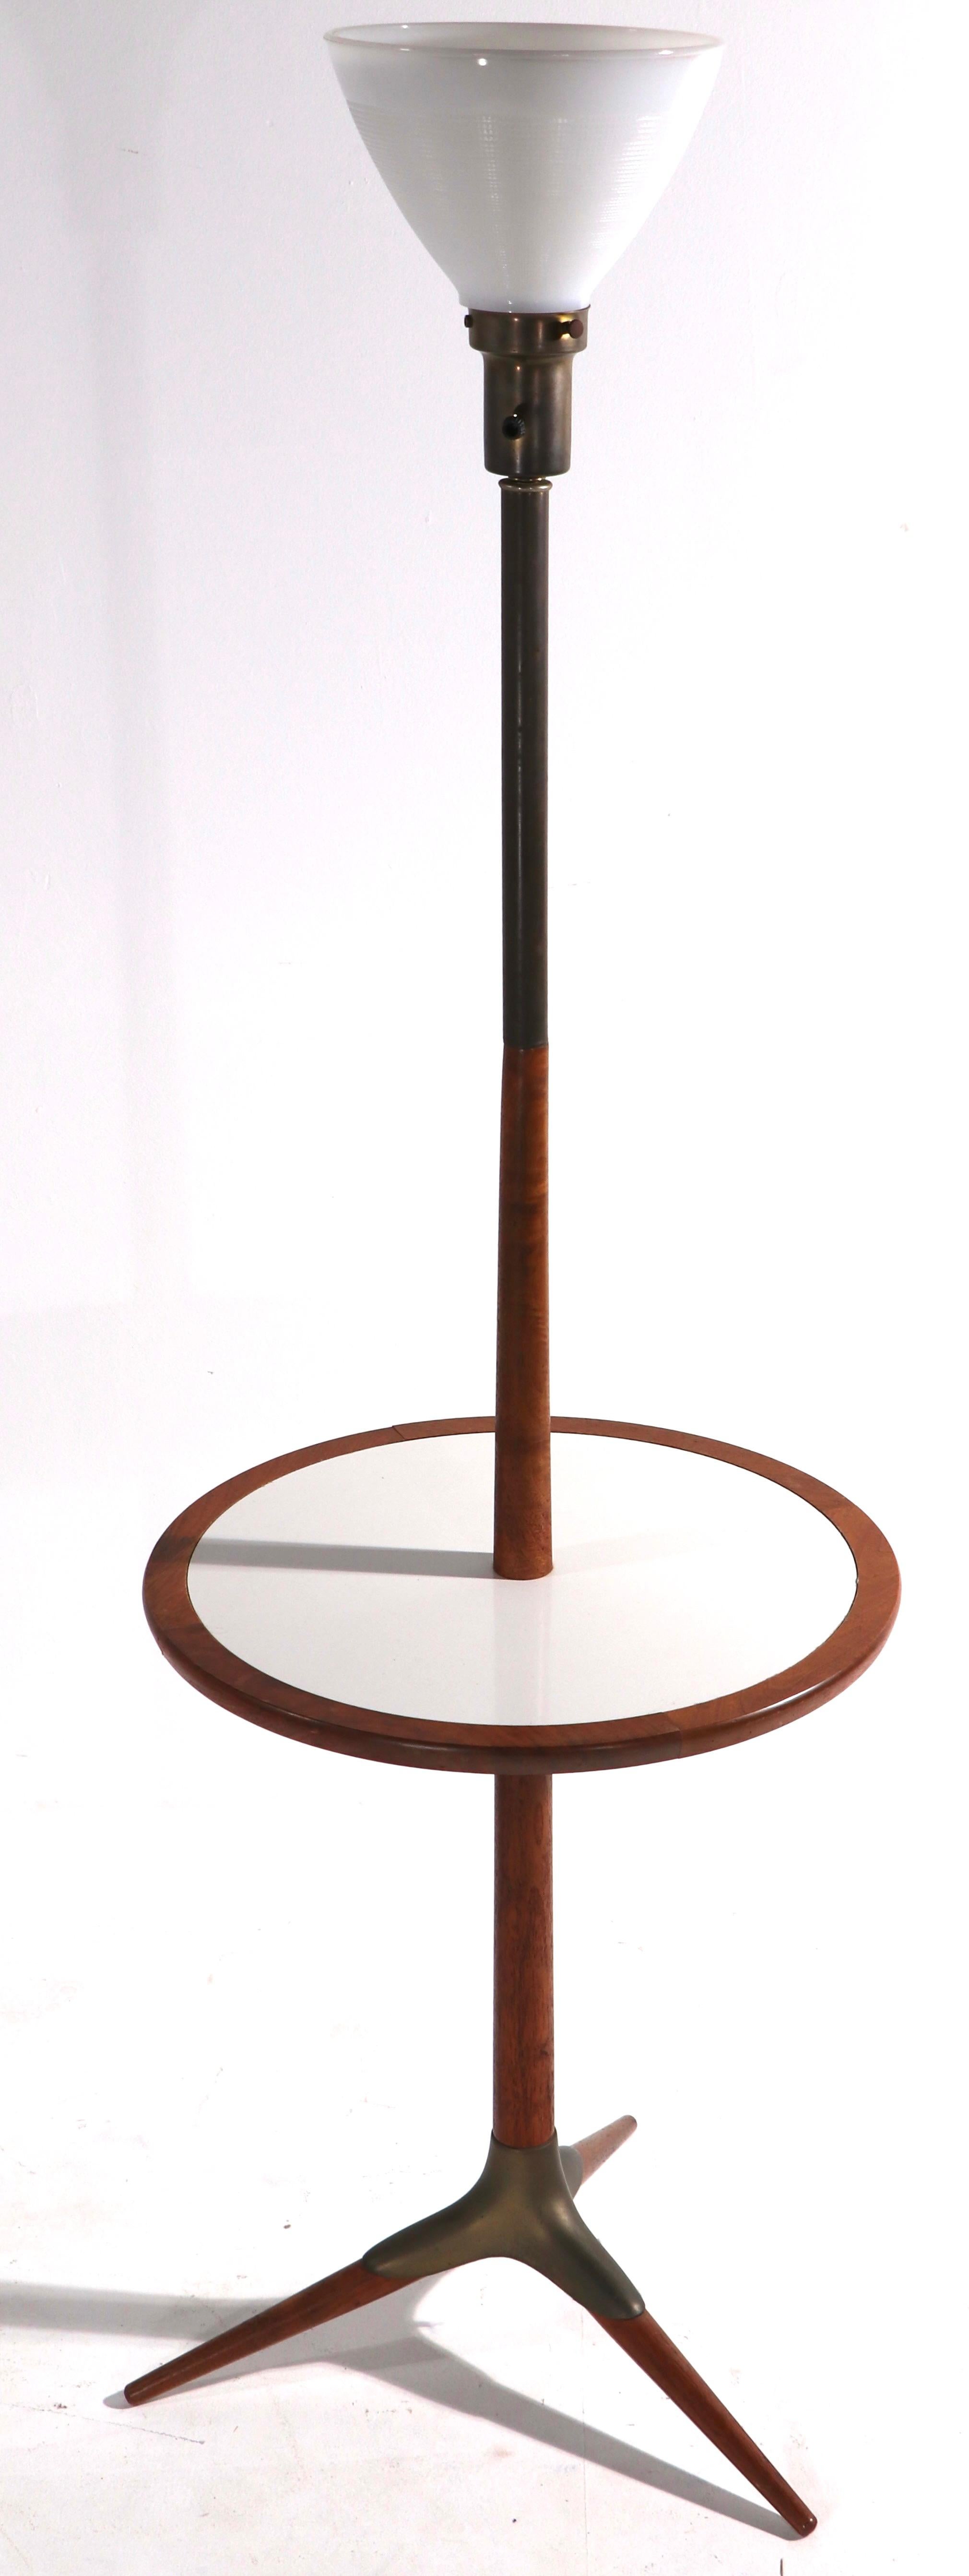 Rare and unusual floor lamp with center table surface by Tony Paul attributed to Westwood Industries. This example isn in very good, original condition, with exception of the wiring which is new. Exceptional mid century design by noted designer,